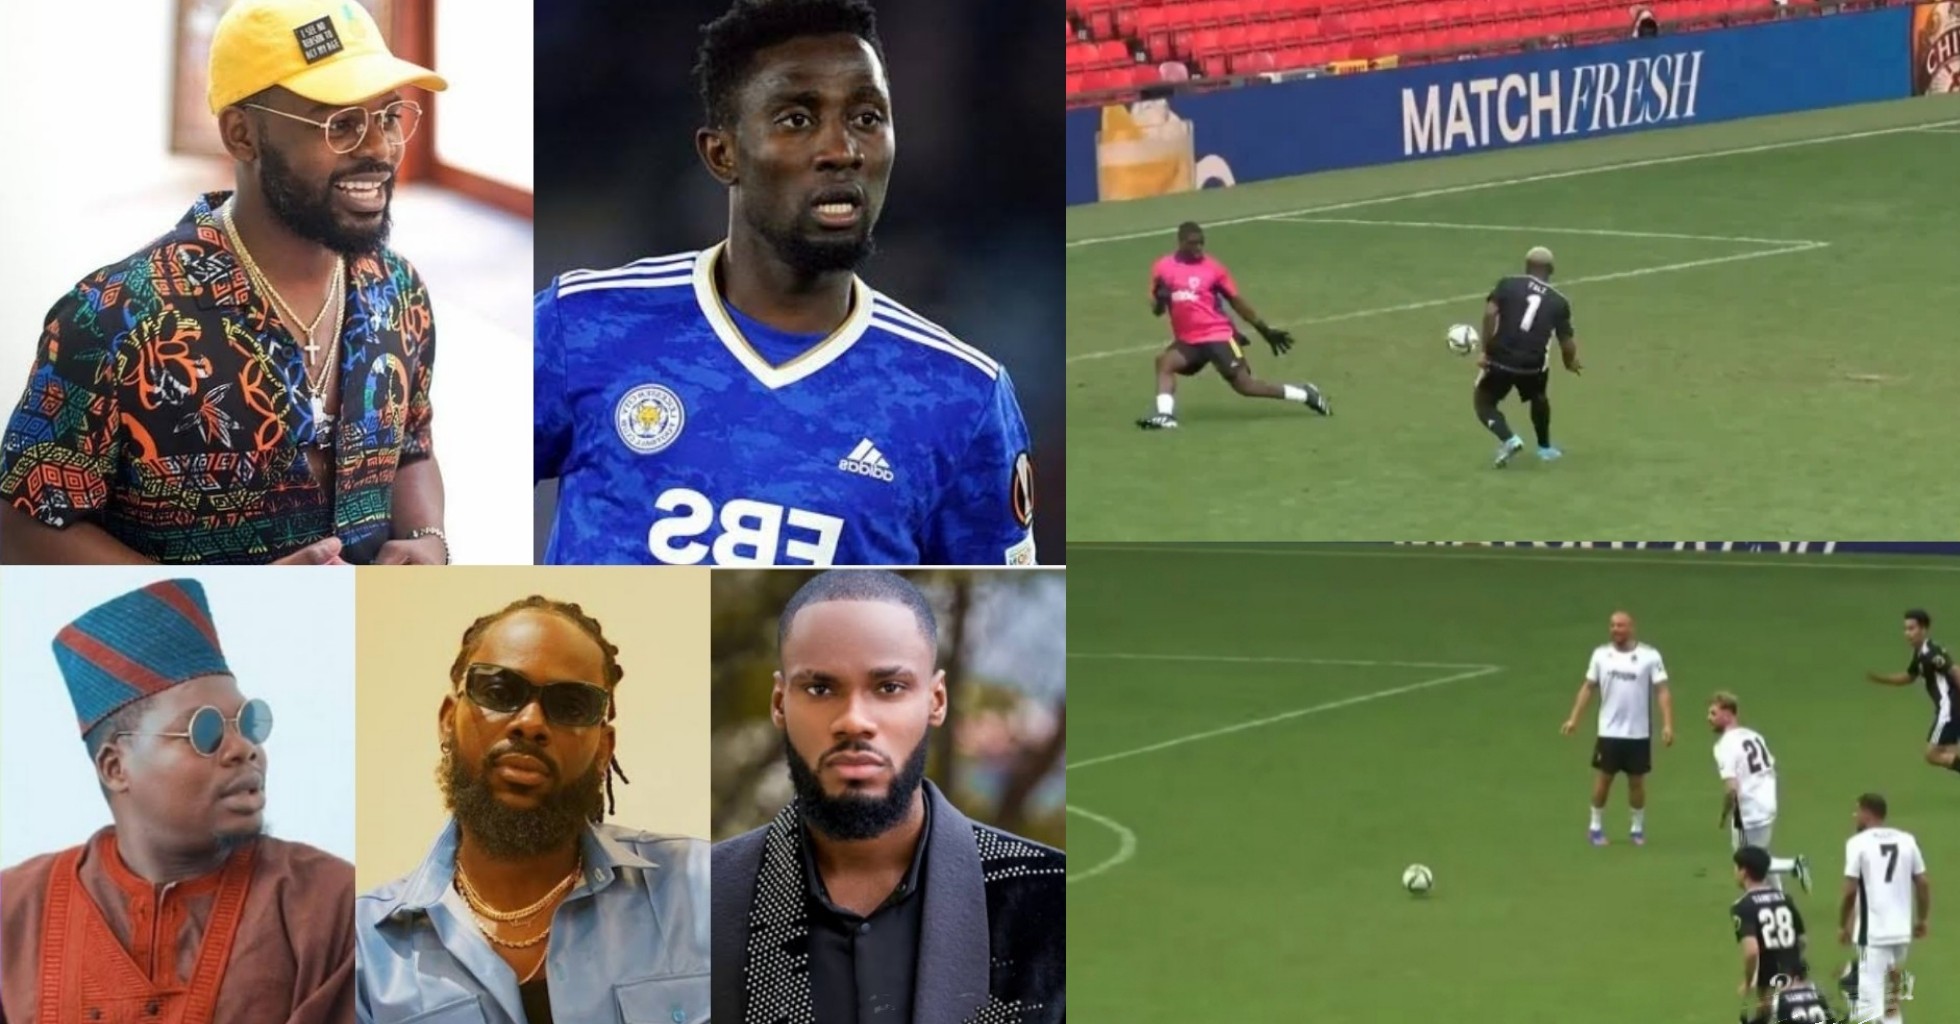 Super Eagles Star Ndidi, Adekunle Gold, others react as Falz scores in novelty match at Old Trafford [VIDEO]